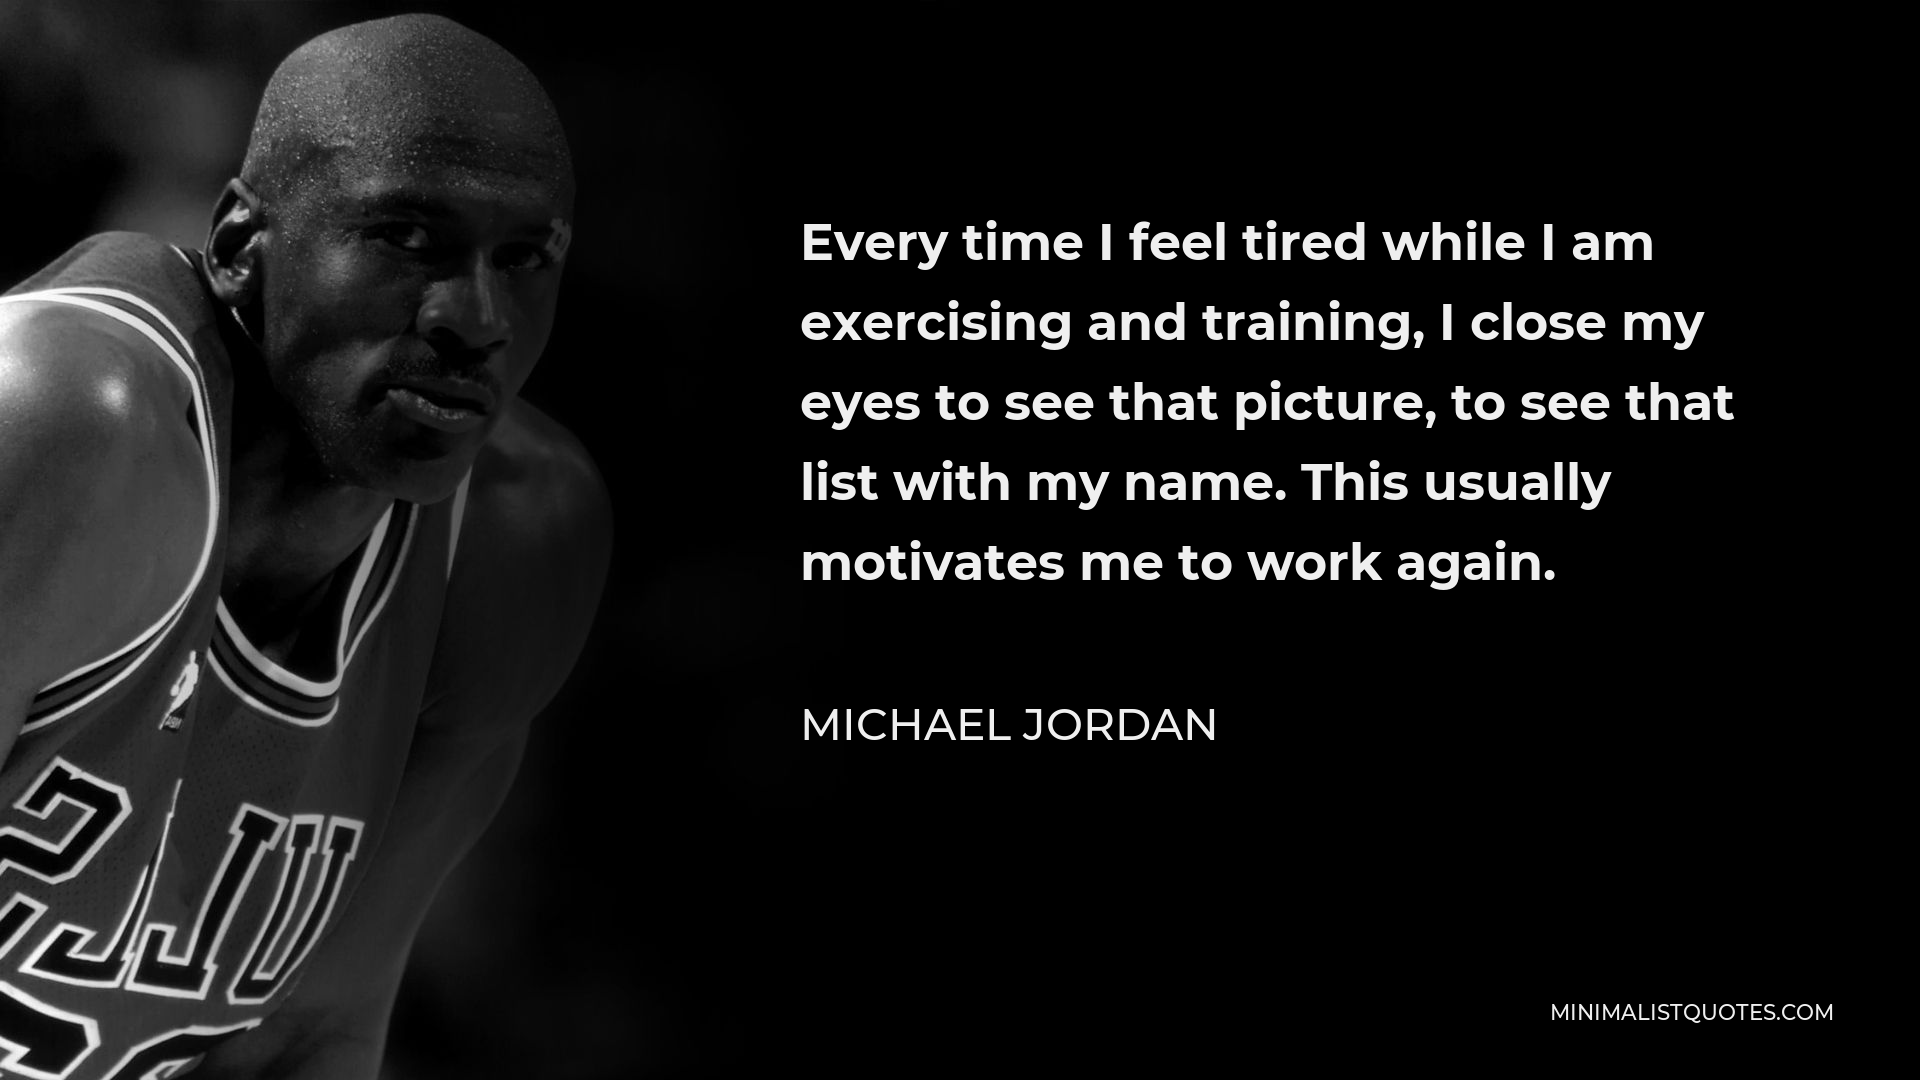 Michael Jordan Quote - Every time I feel tired while I am exercising and training, I close my eyes to see that picture, to see that list with my name. This usually motivates me to work again.